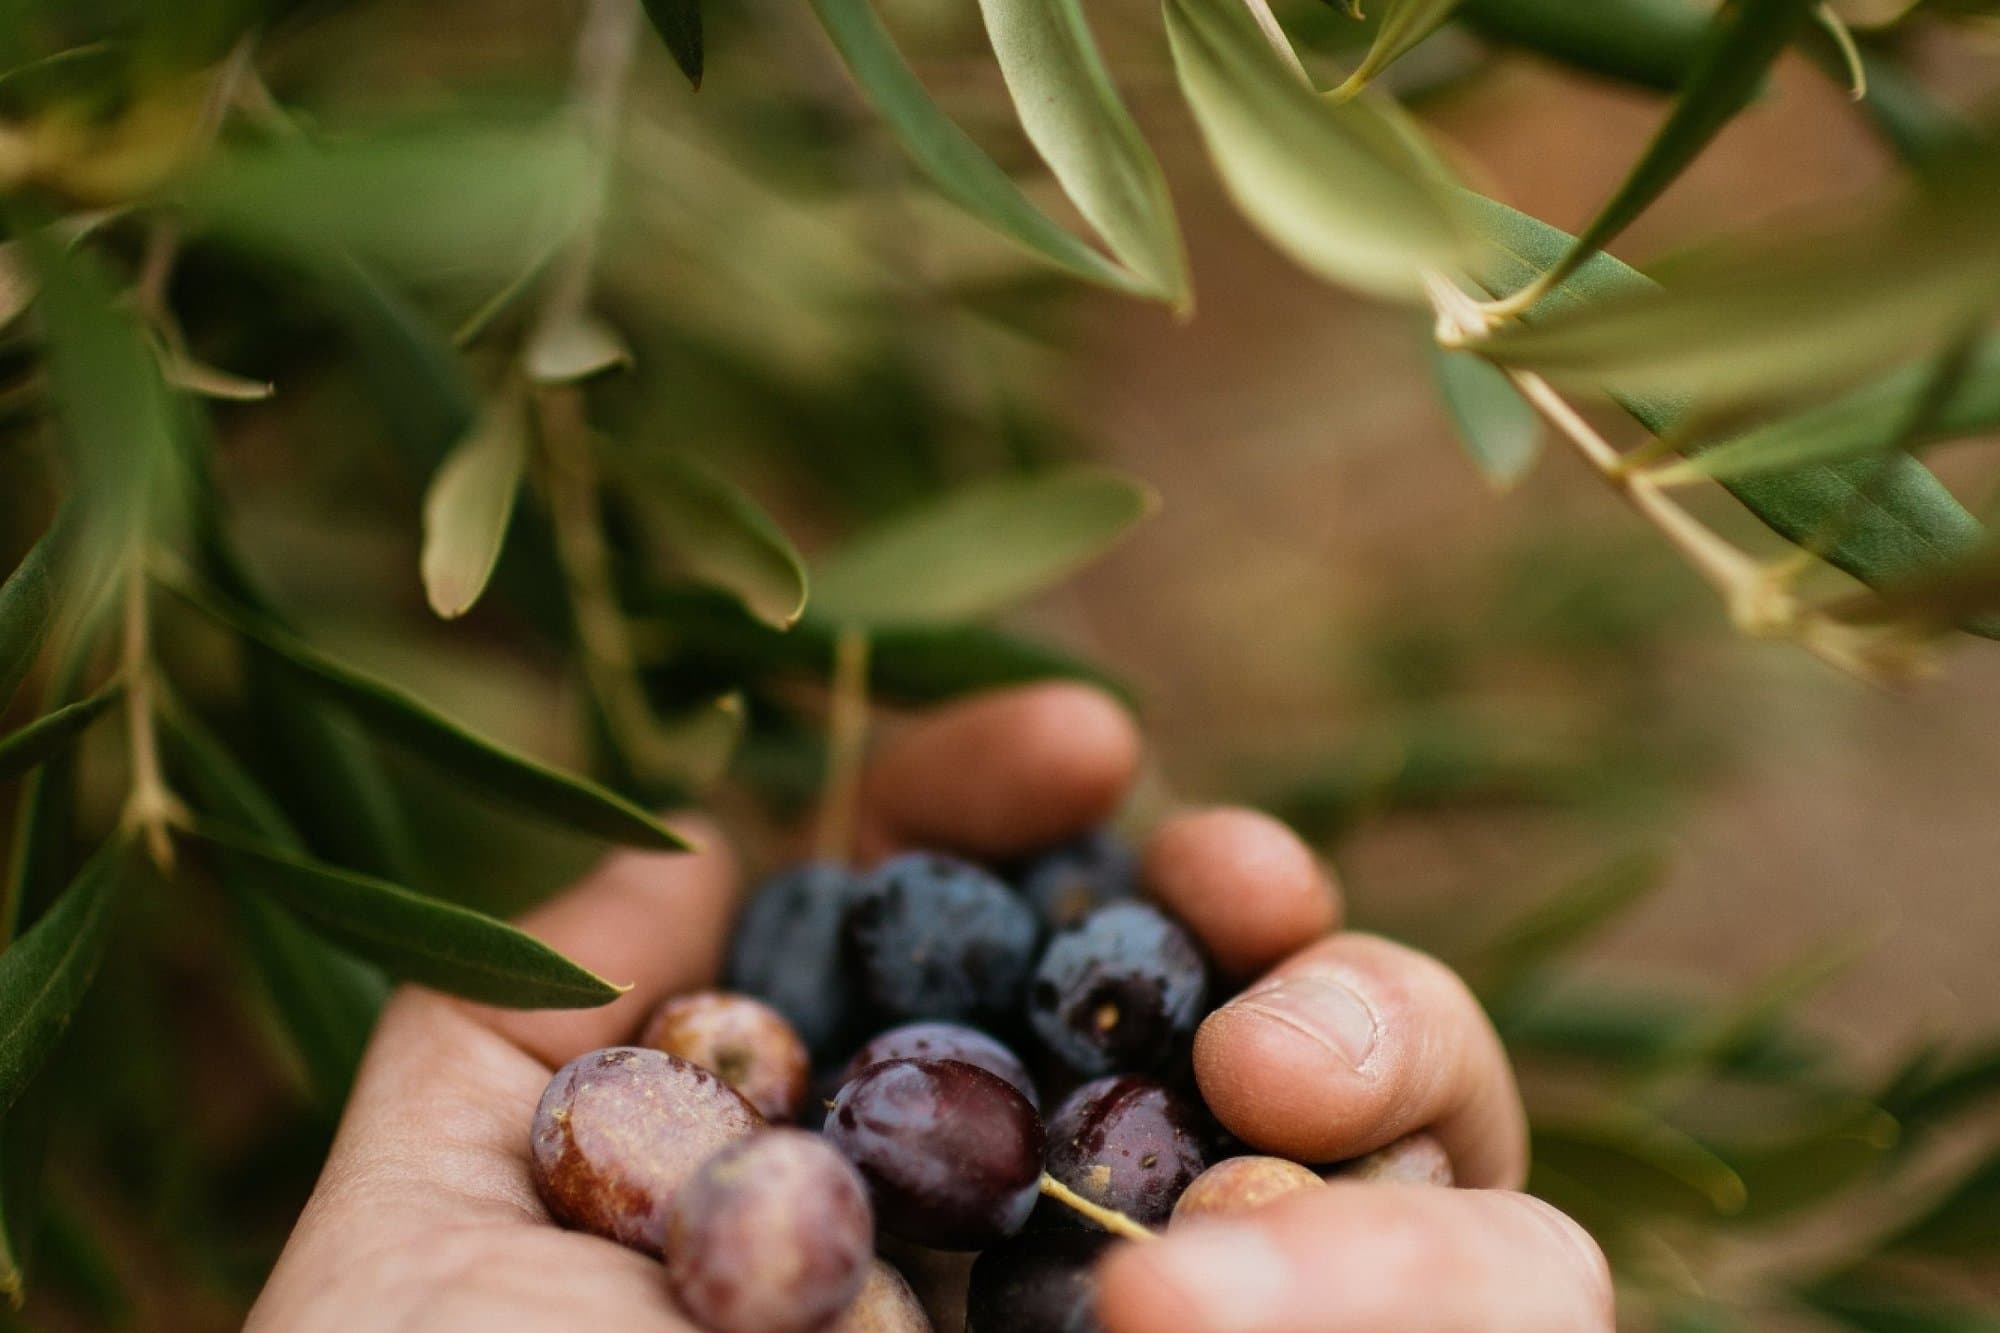 A hand holding several olives on a vine